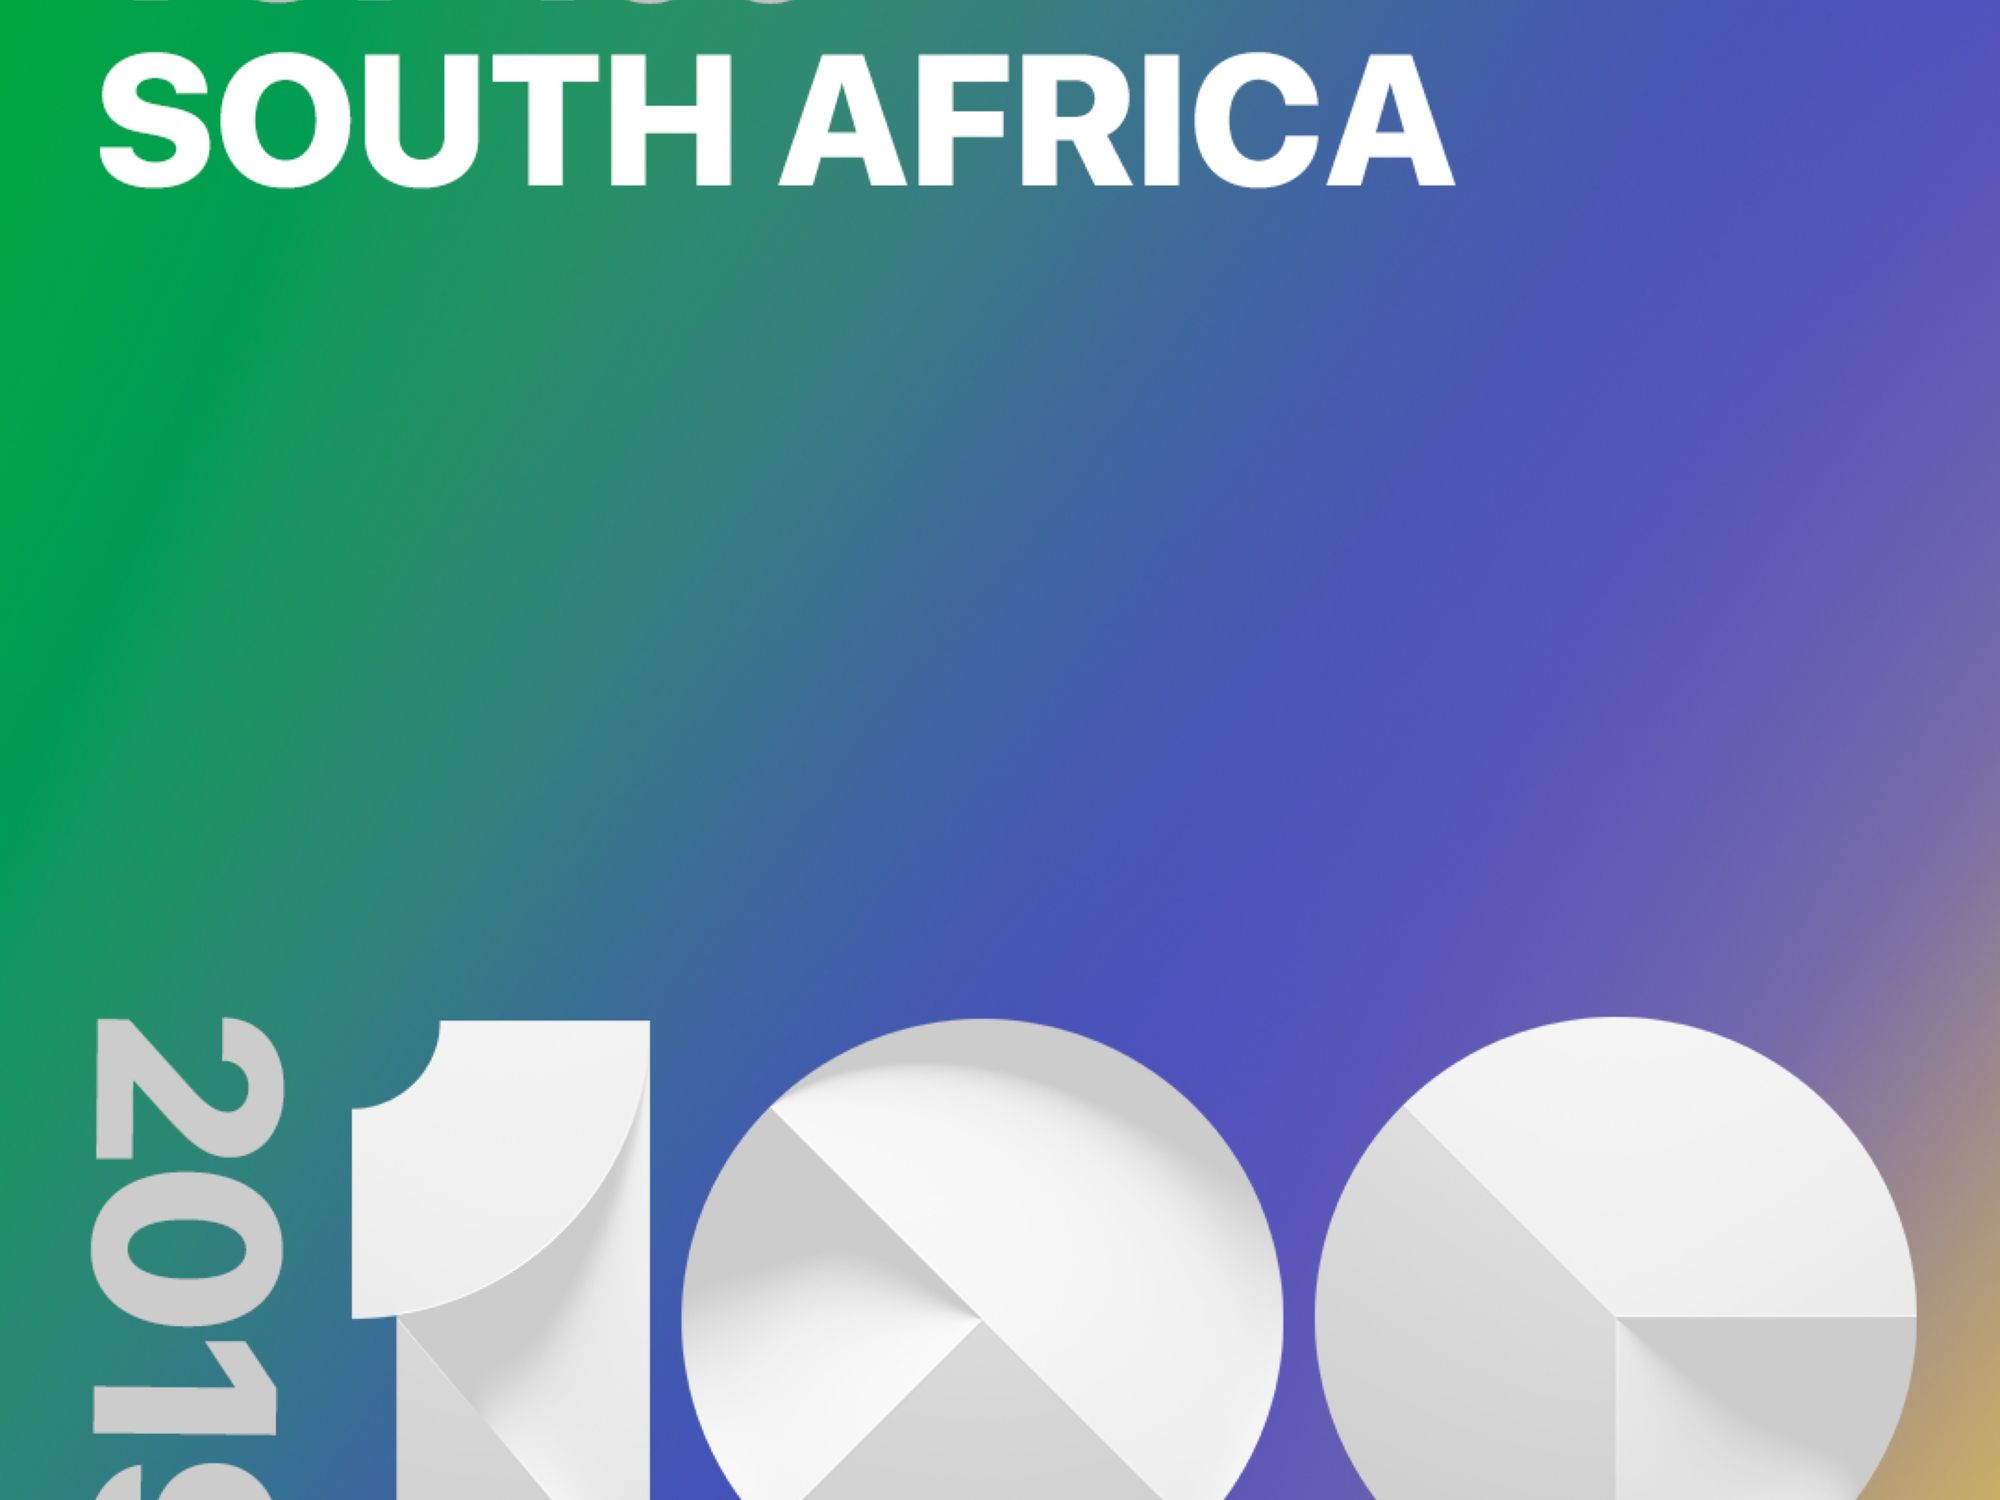 These are 2019’s Most Shazamed South African Songs